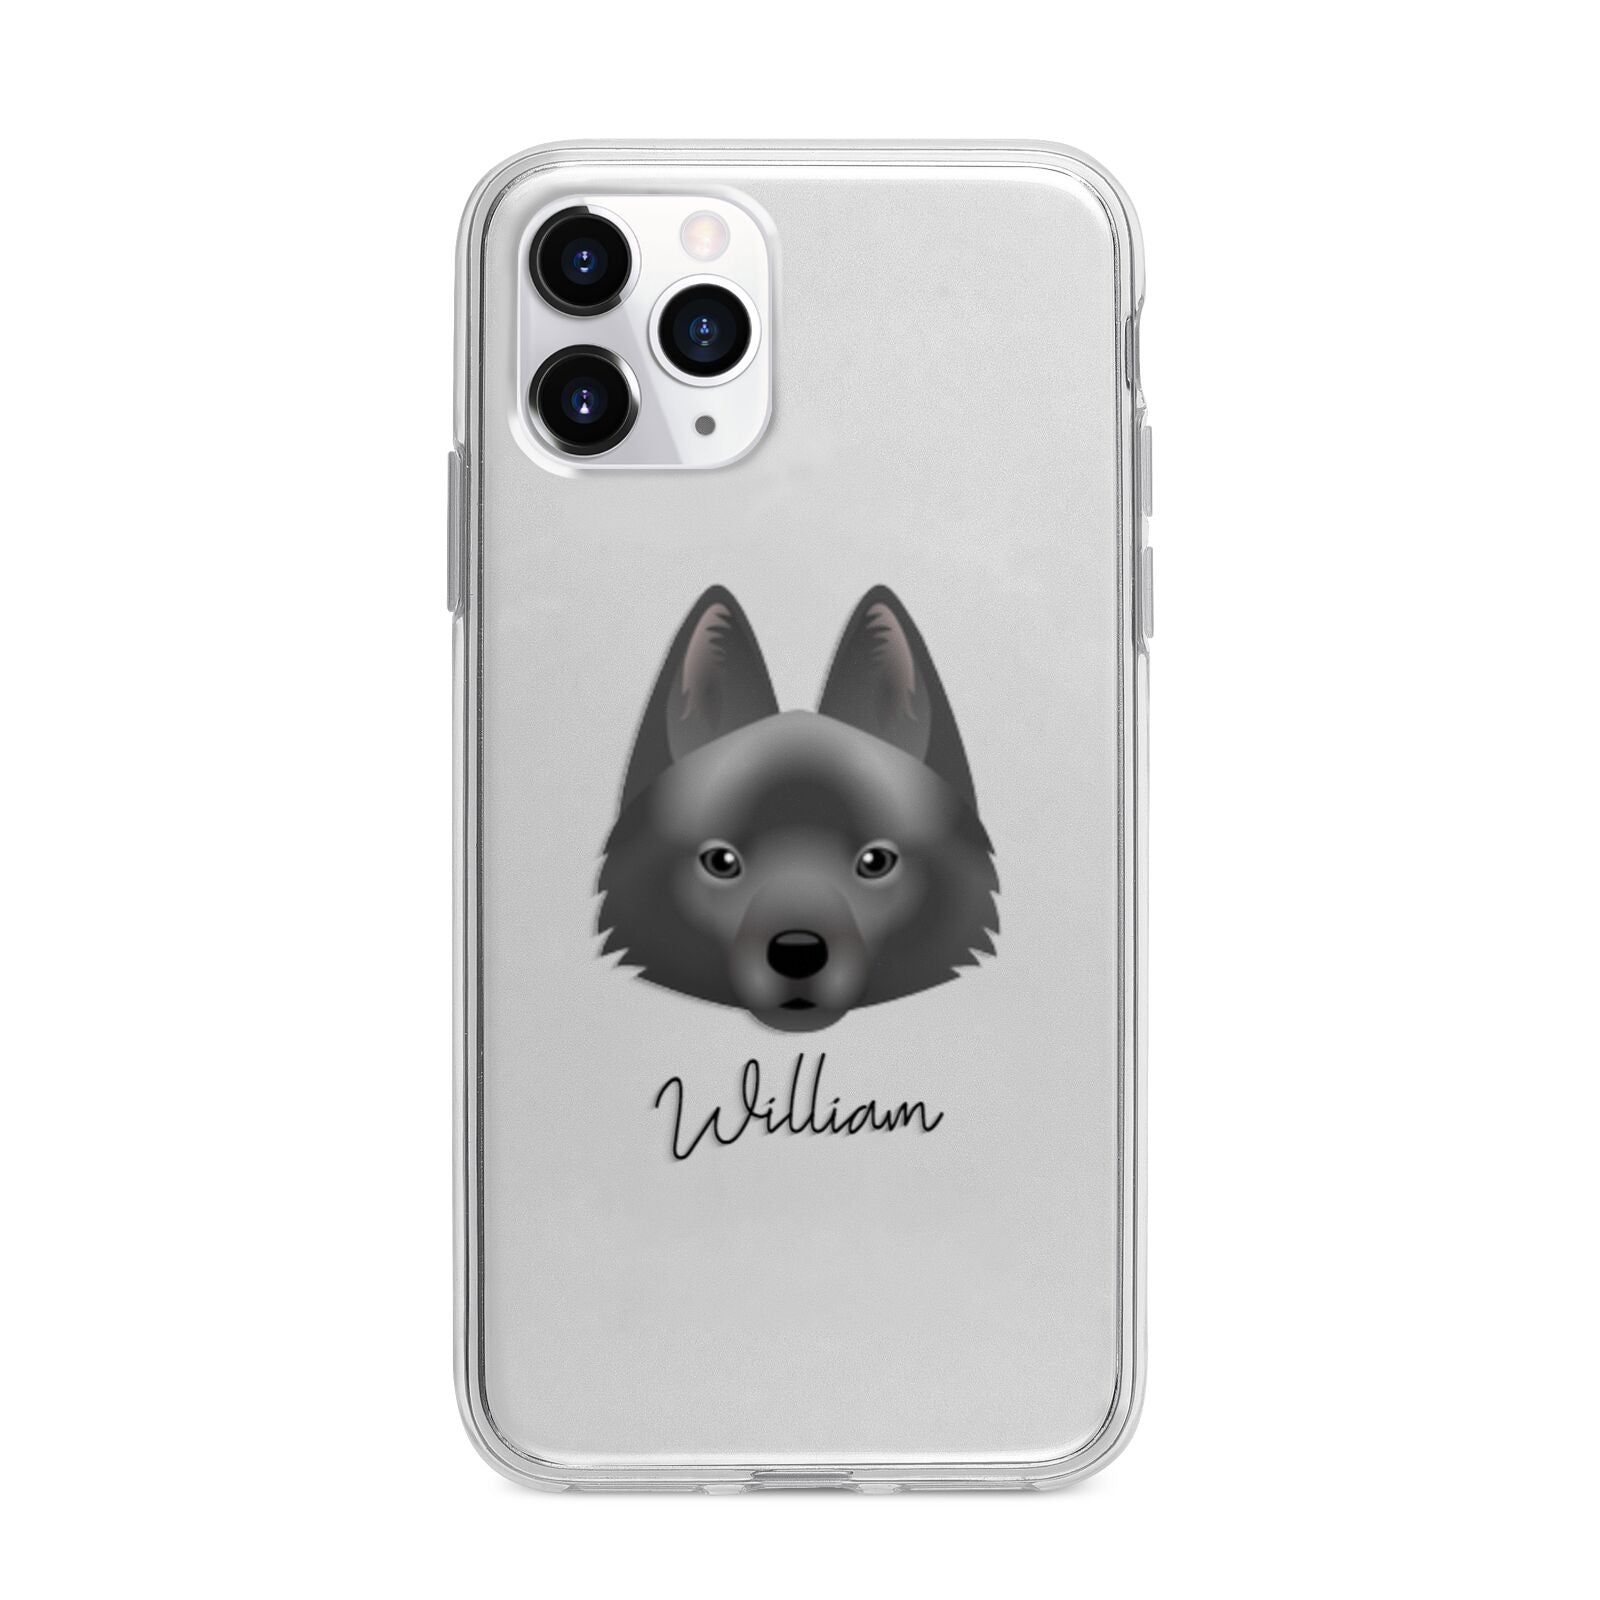 Schipperke Personalised Apple iPhone 11 Pro Max in Silver with Bumper Case